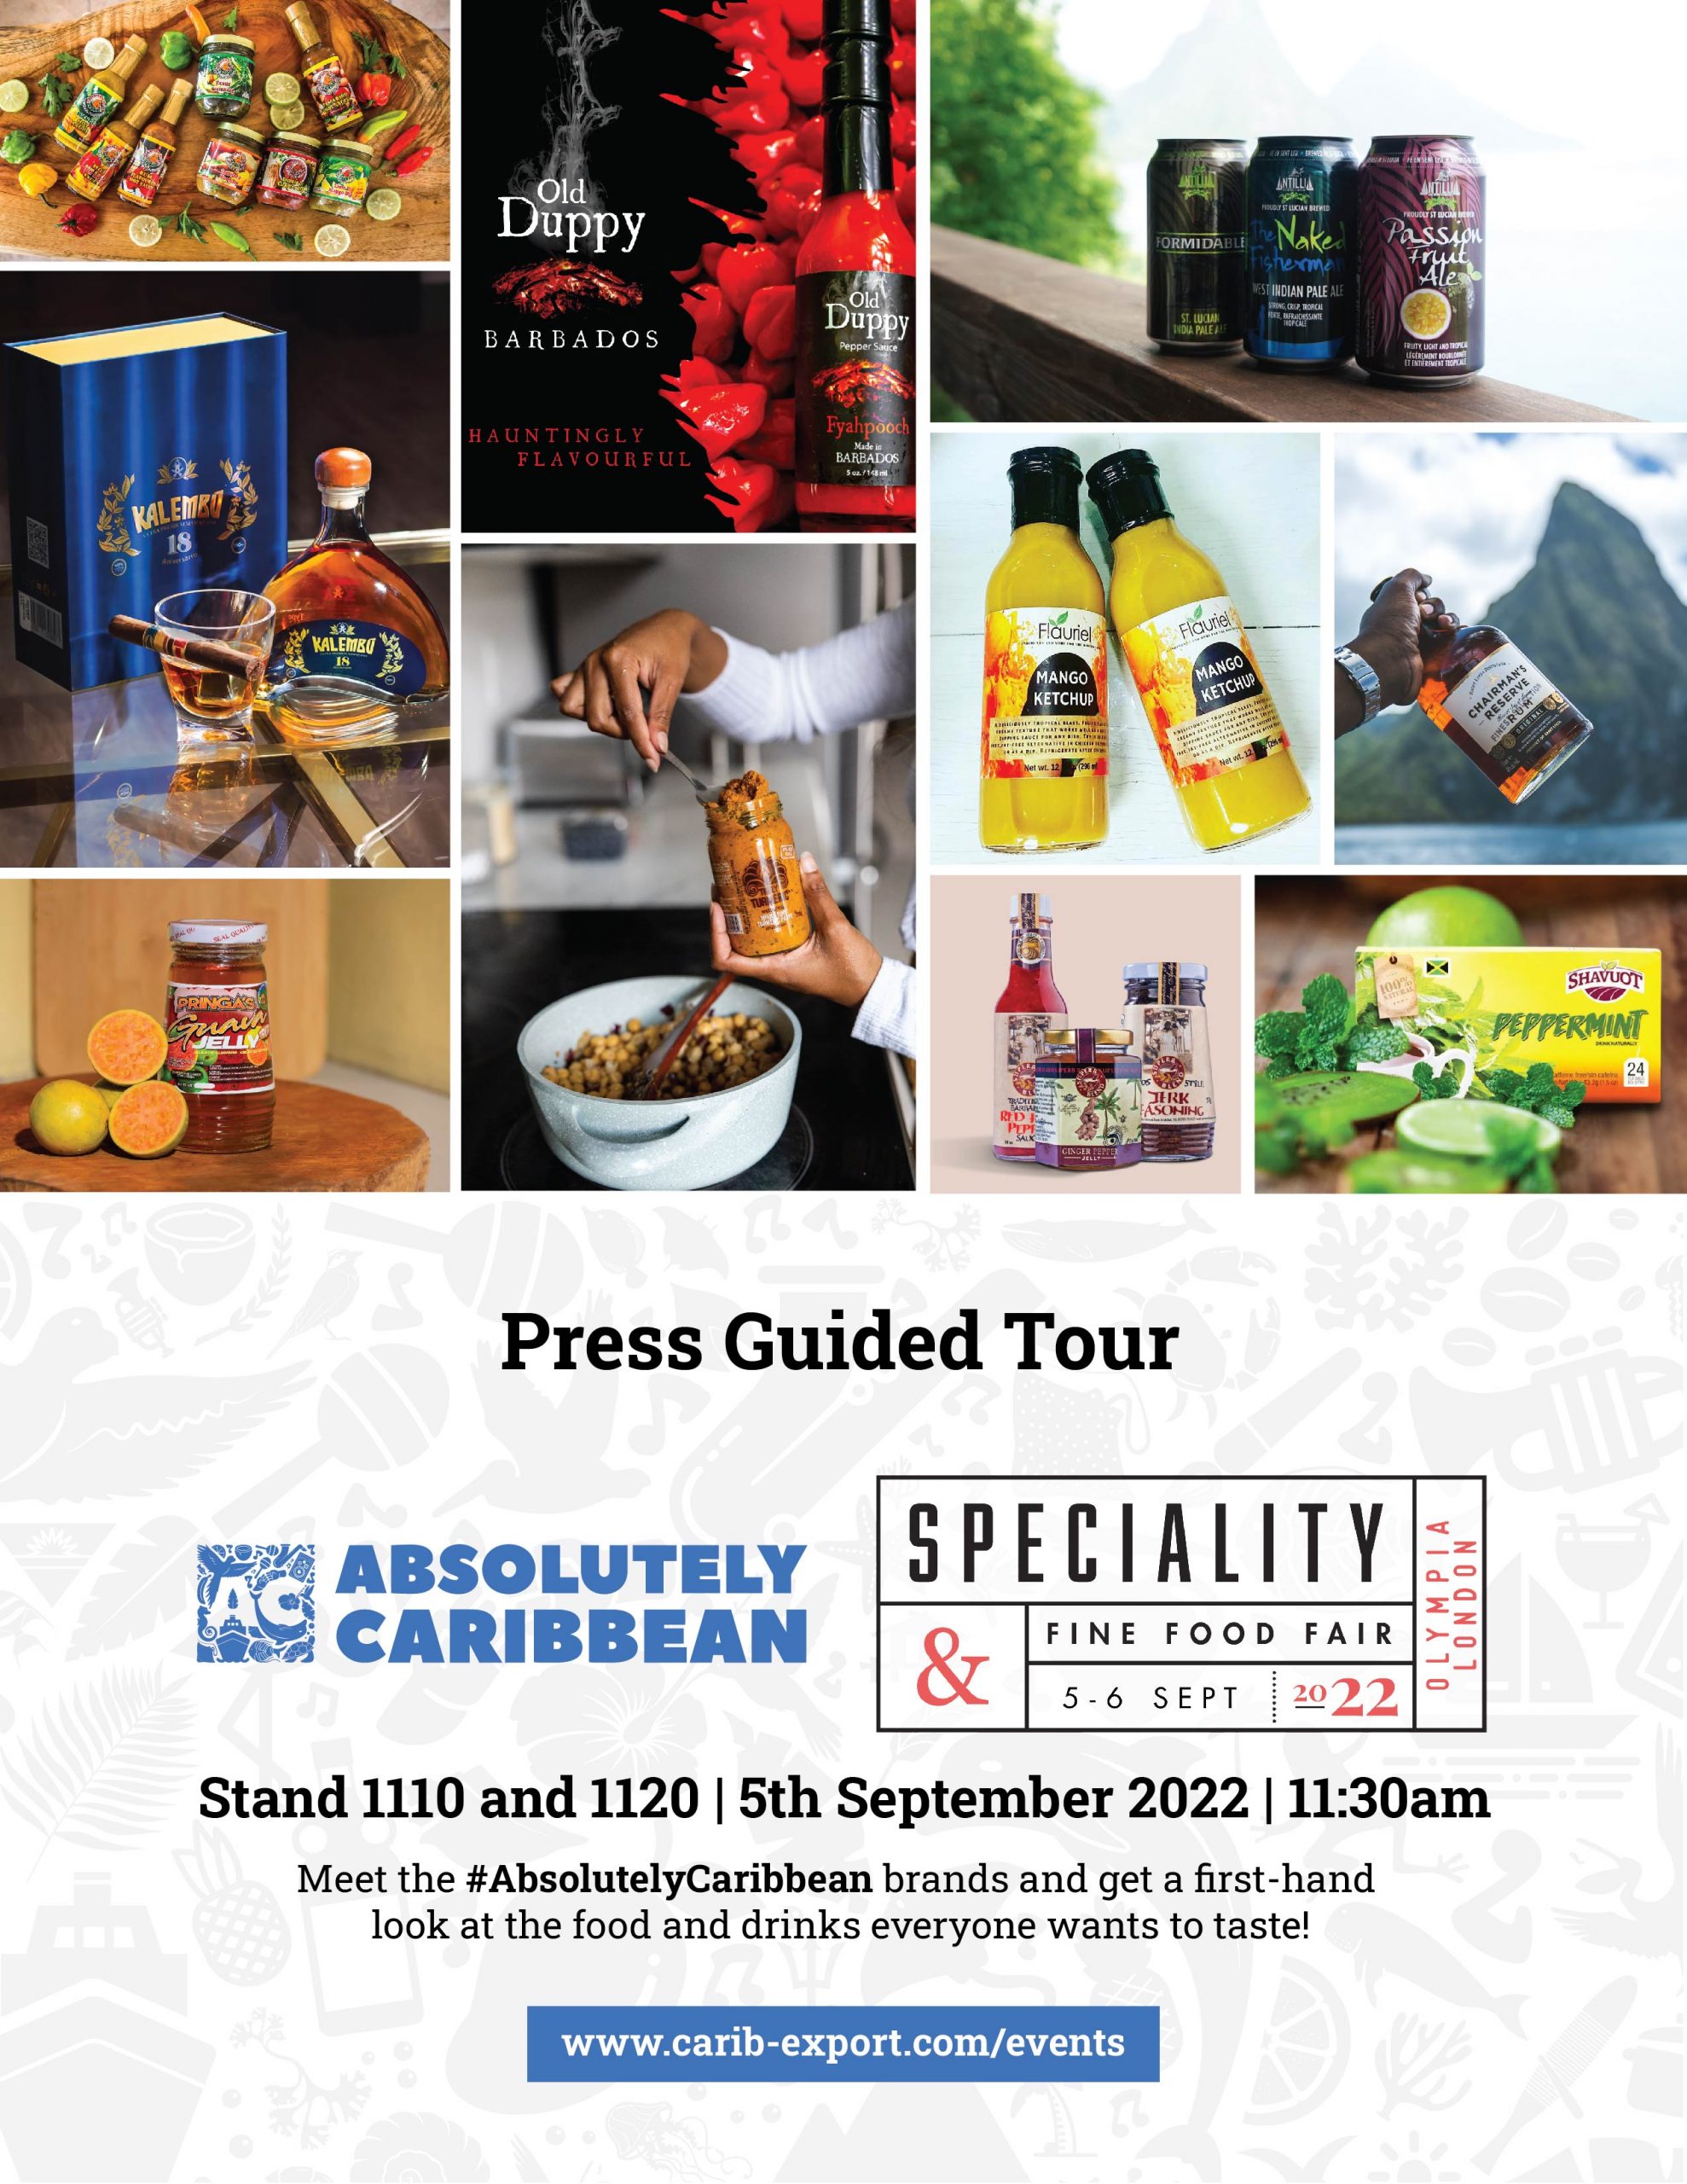 Absolutely Ready for Speciality & Fine Food Fair